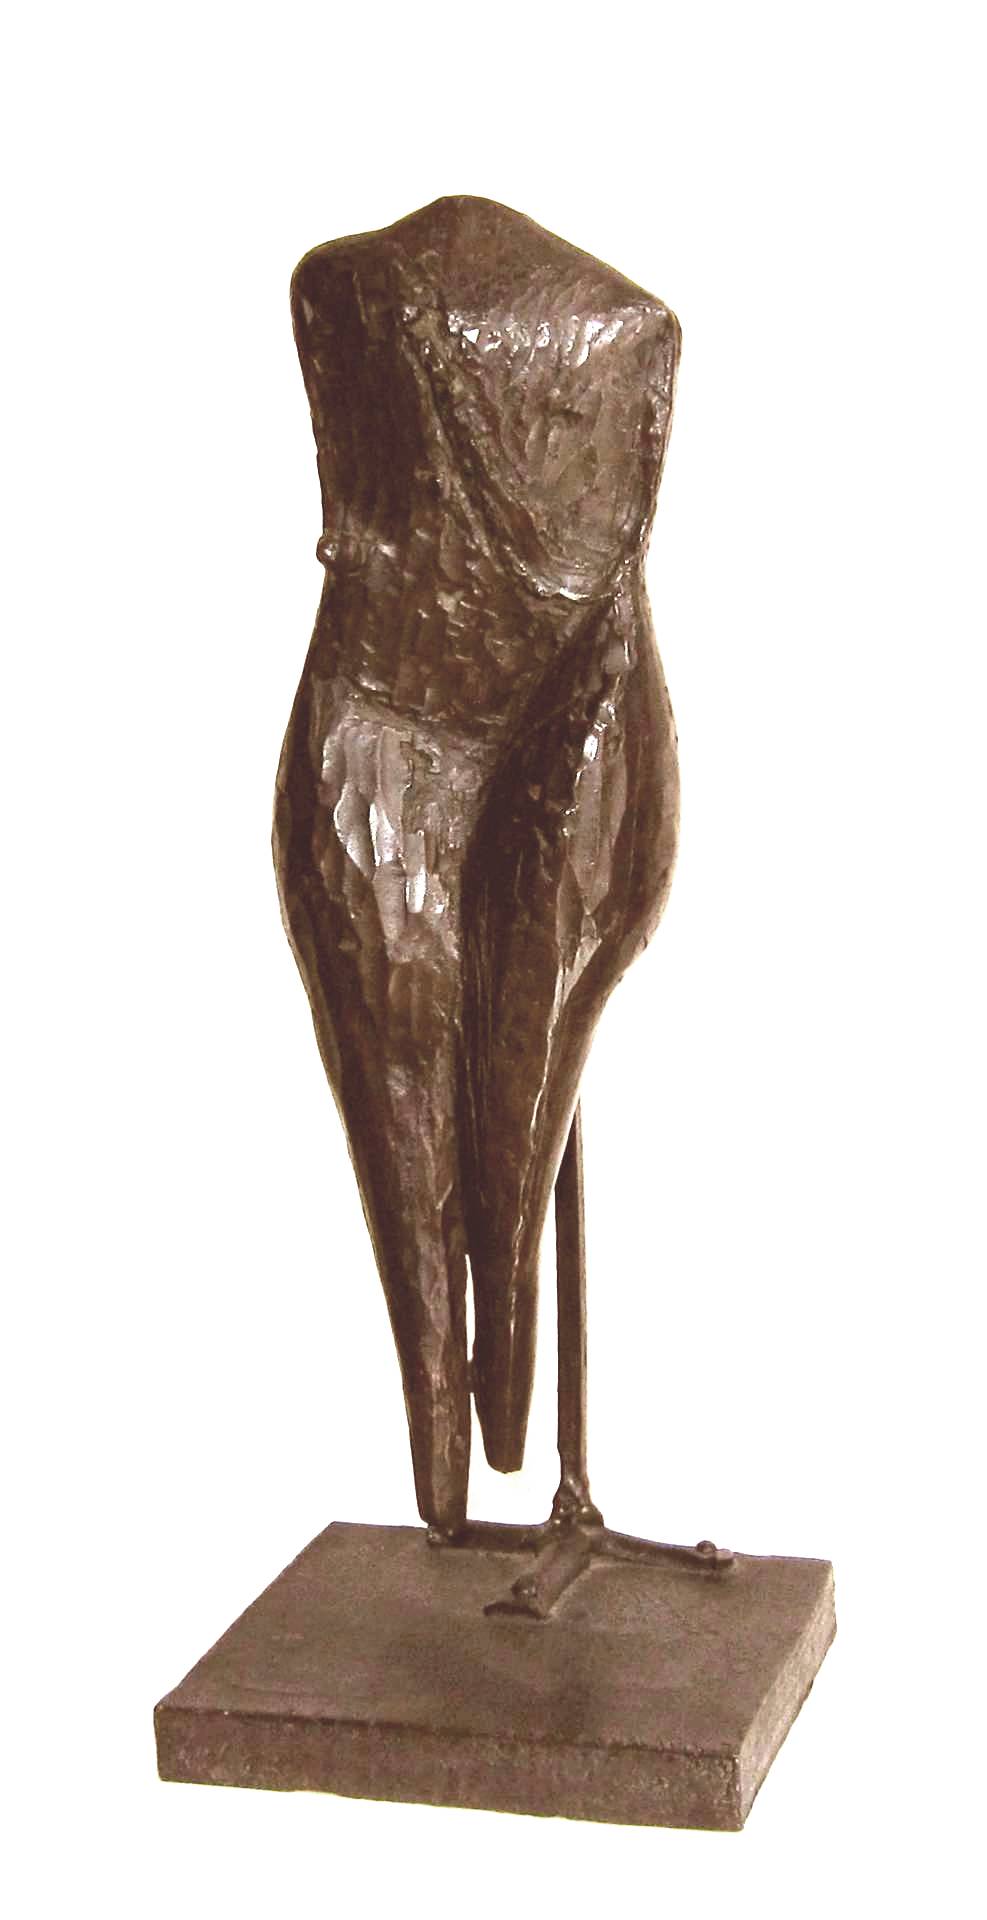 CESAR [1921-98]. Nude Woman, 1947. Bronze, edition of 8 [7/8]. This was modelled in plaster by Cesar